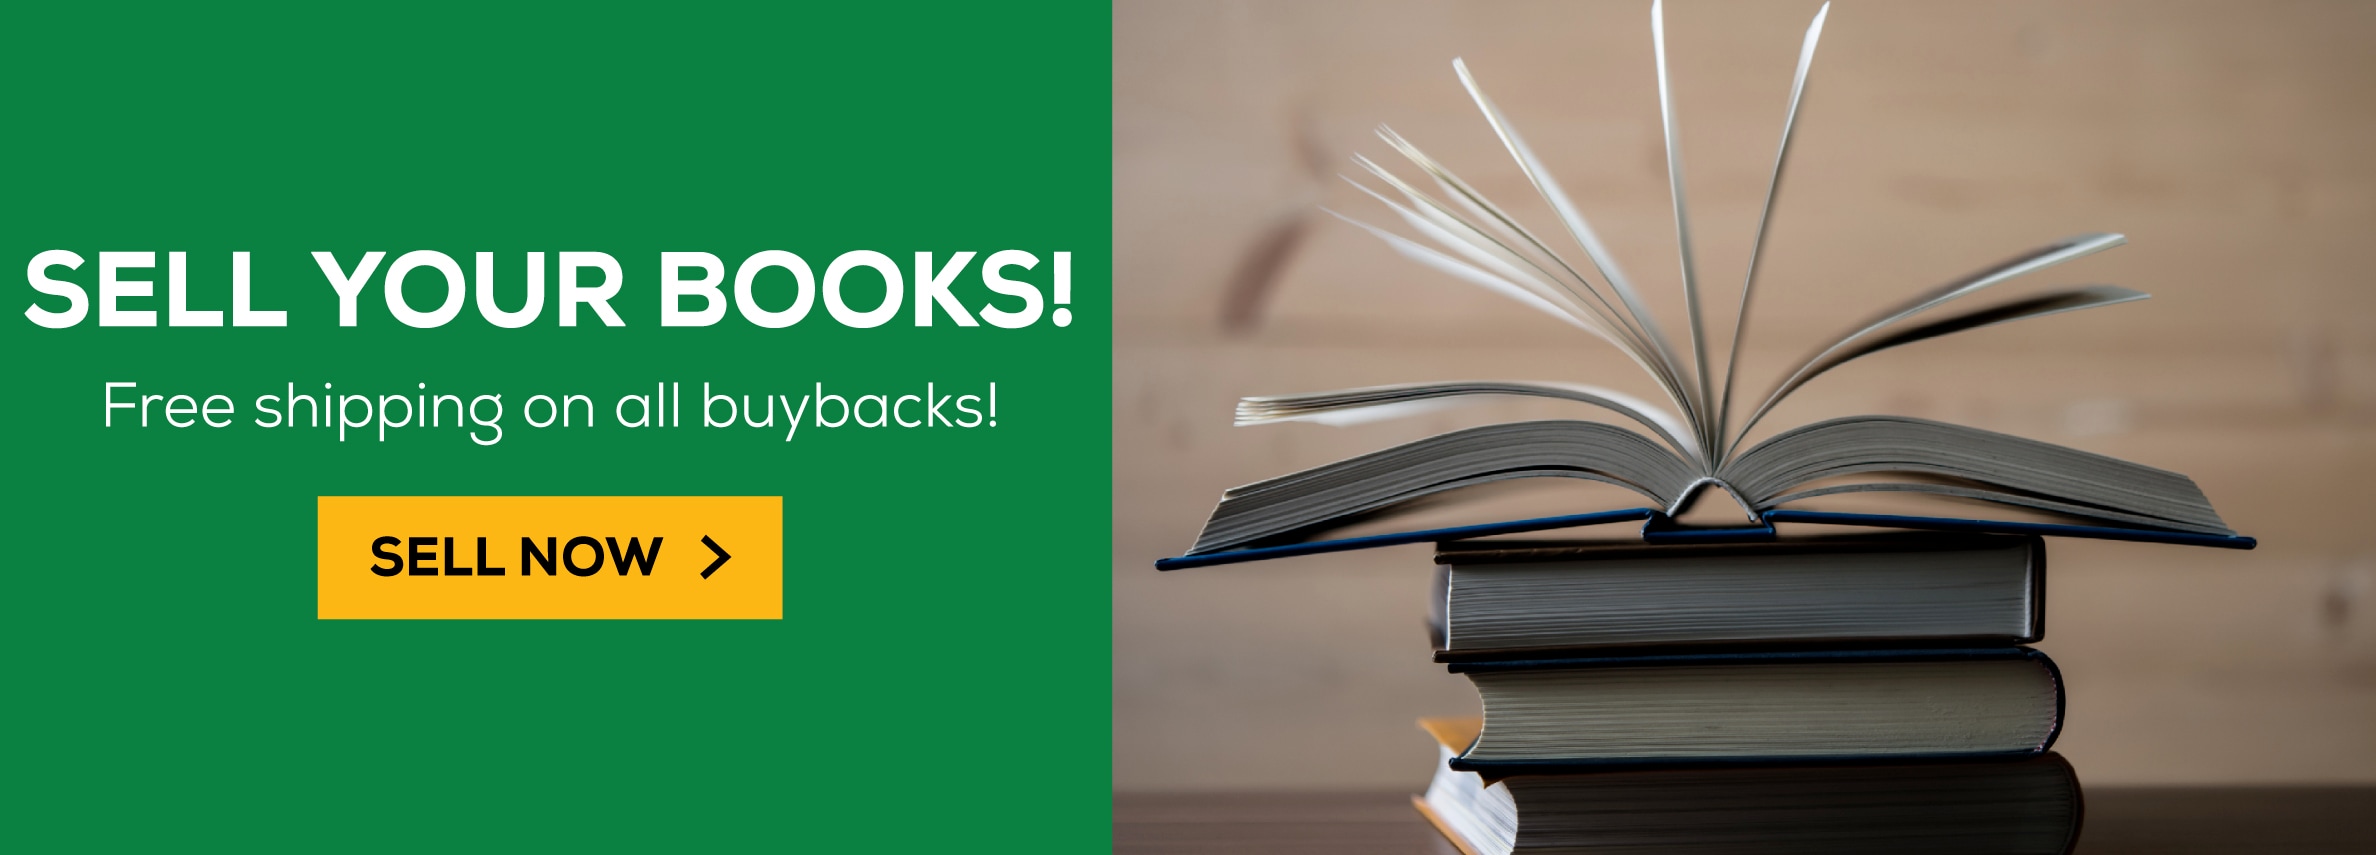 Sell your books! Free shipping on all buybacks! Sell now.					